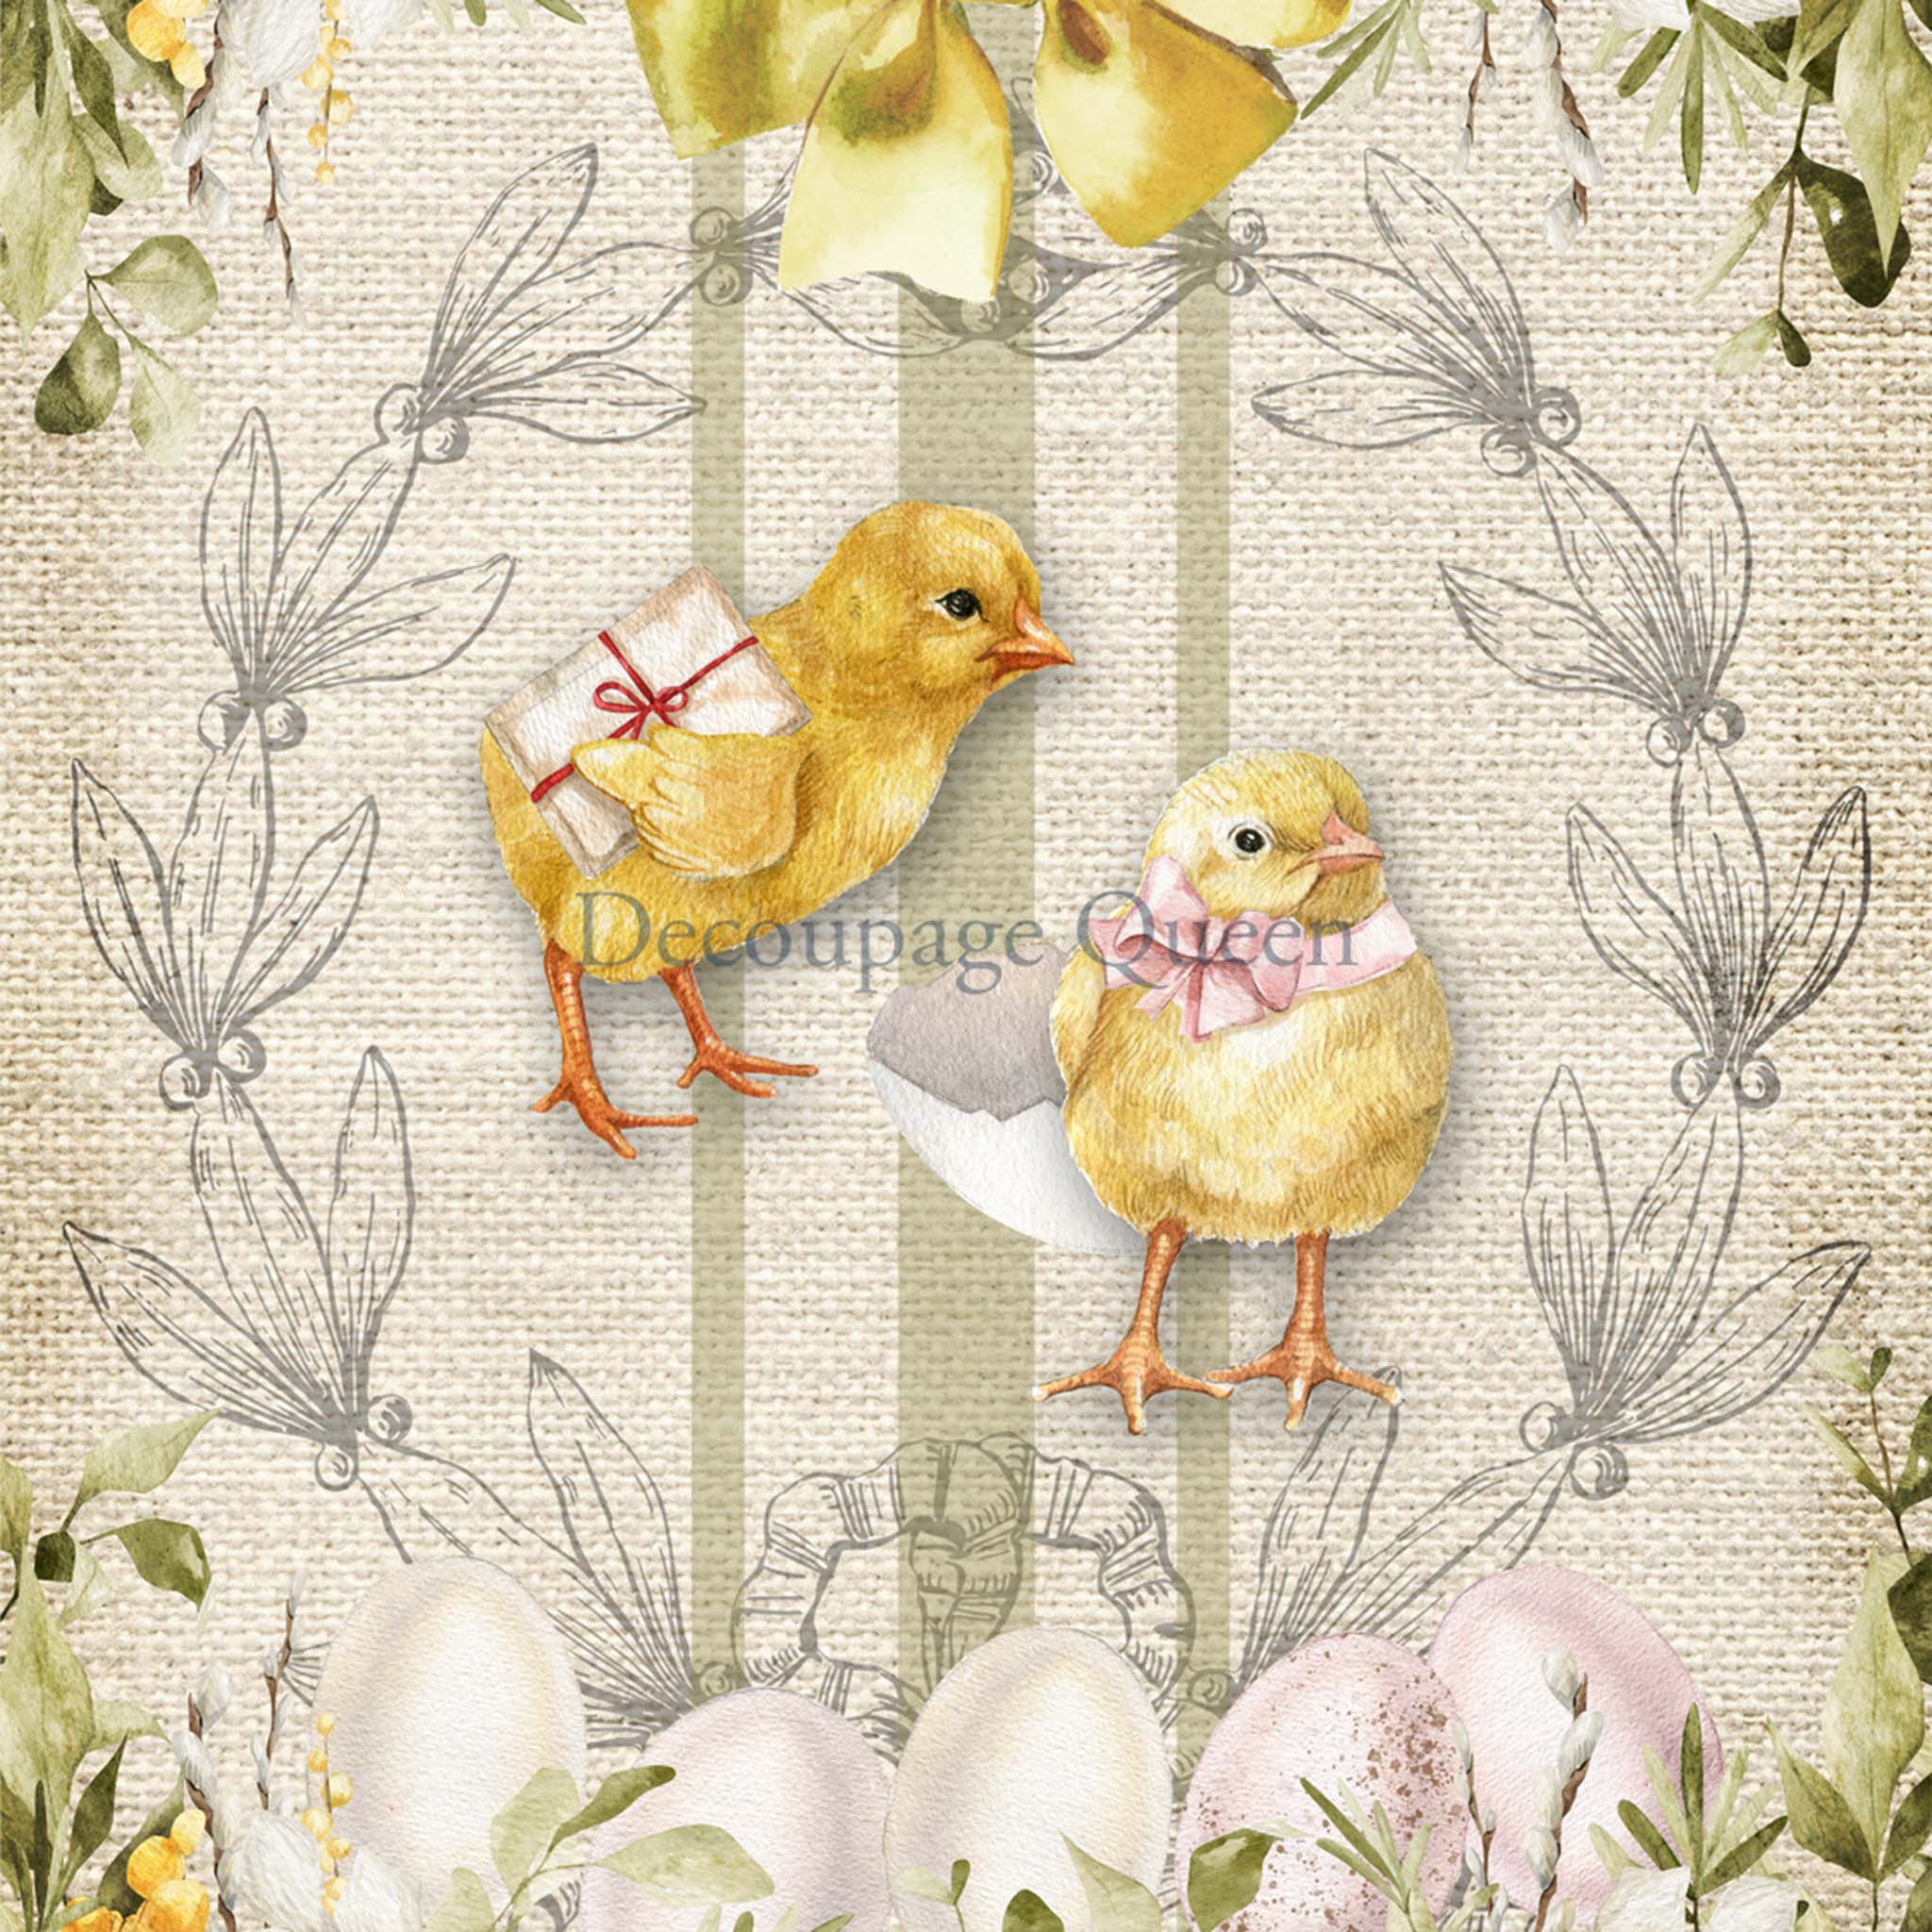 Close-up of an A4 rice paper design that features two adorable yellow chicks nestled amidst a floral backdrop on a rustic grain sack.